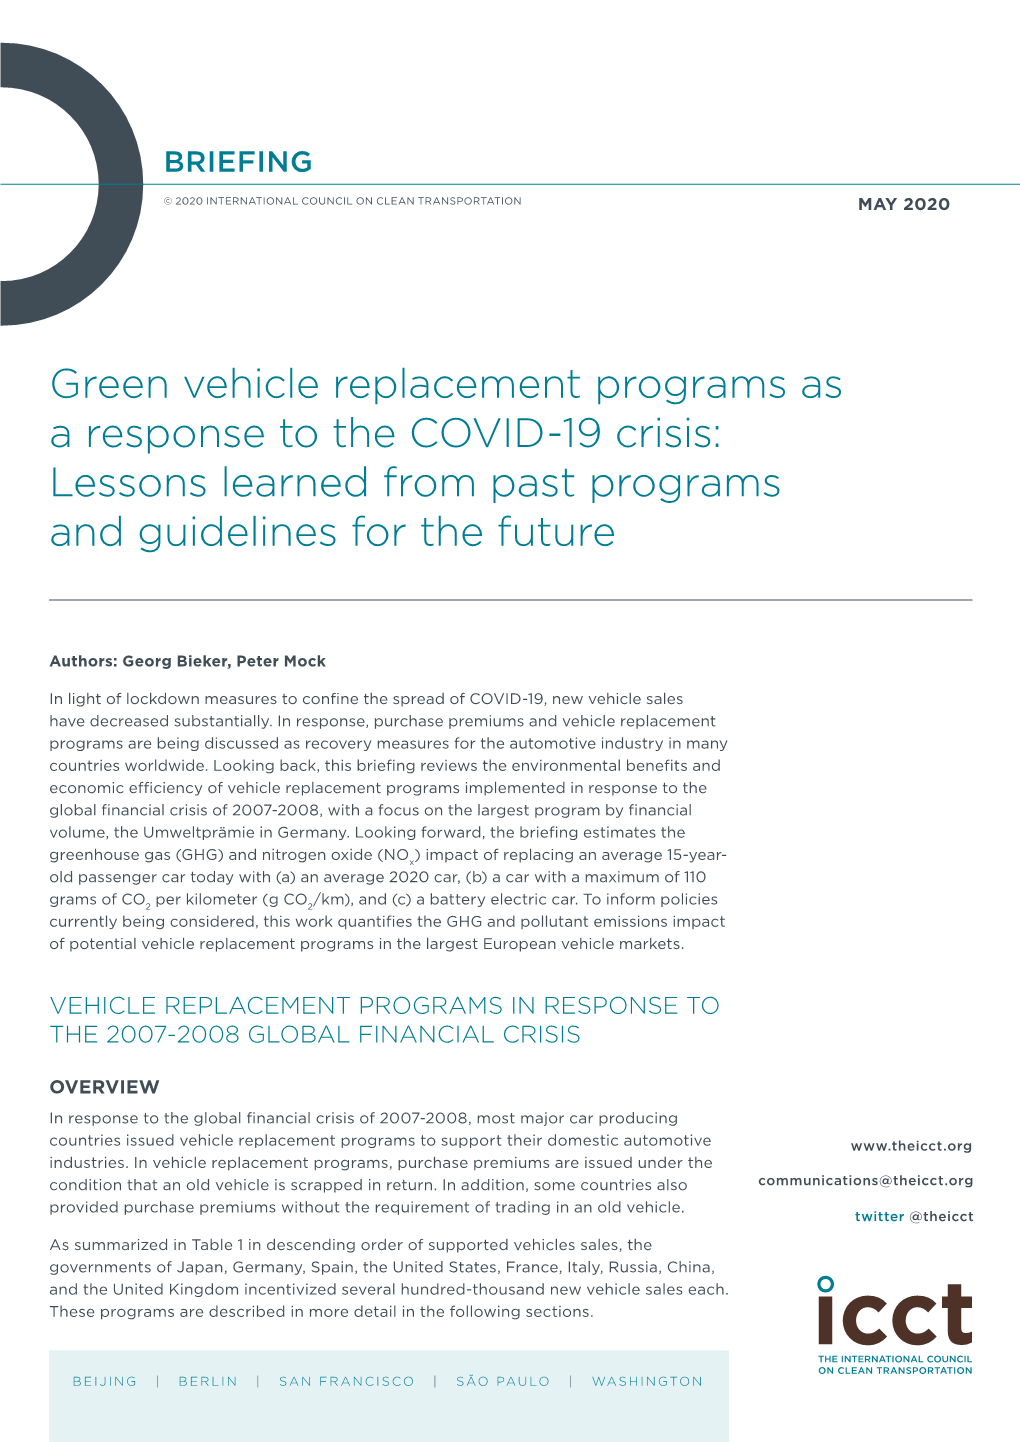 green-vehicle-replacement-programs-as-a-response-to-the-covid-19-crisis